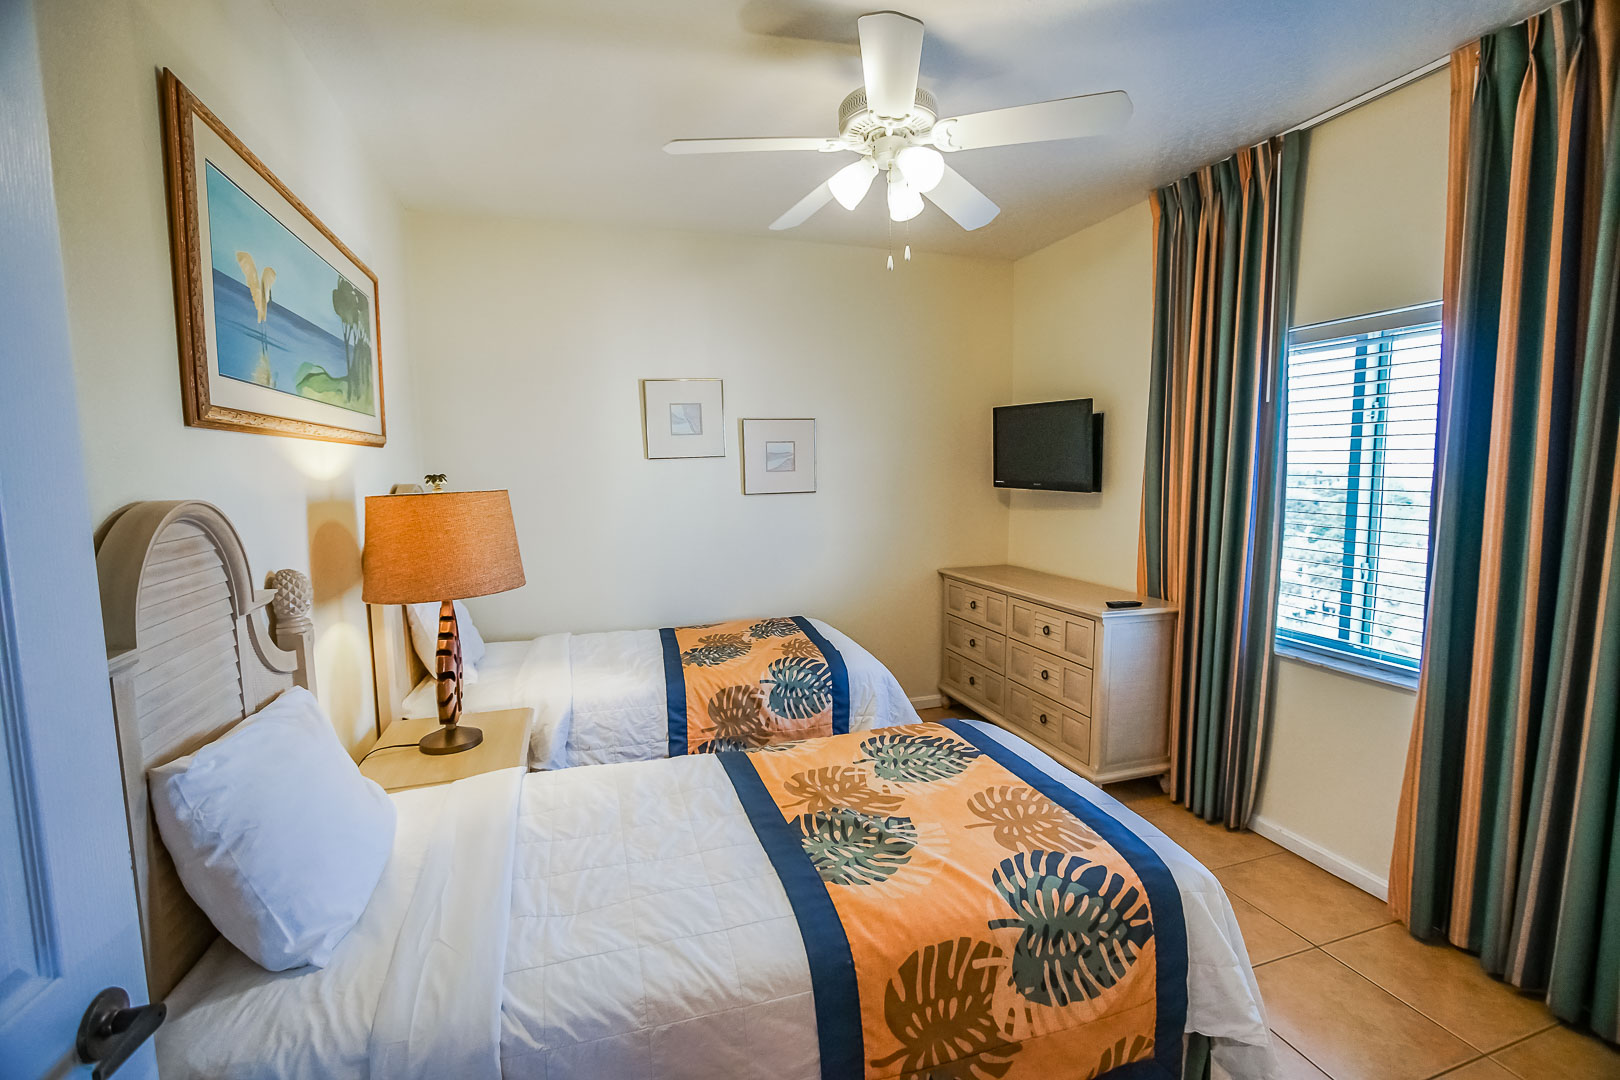 A bedroom with double beds at VRI's Discovery Beach Resort in Cocoa Beach, Florida.